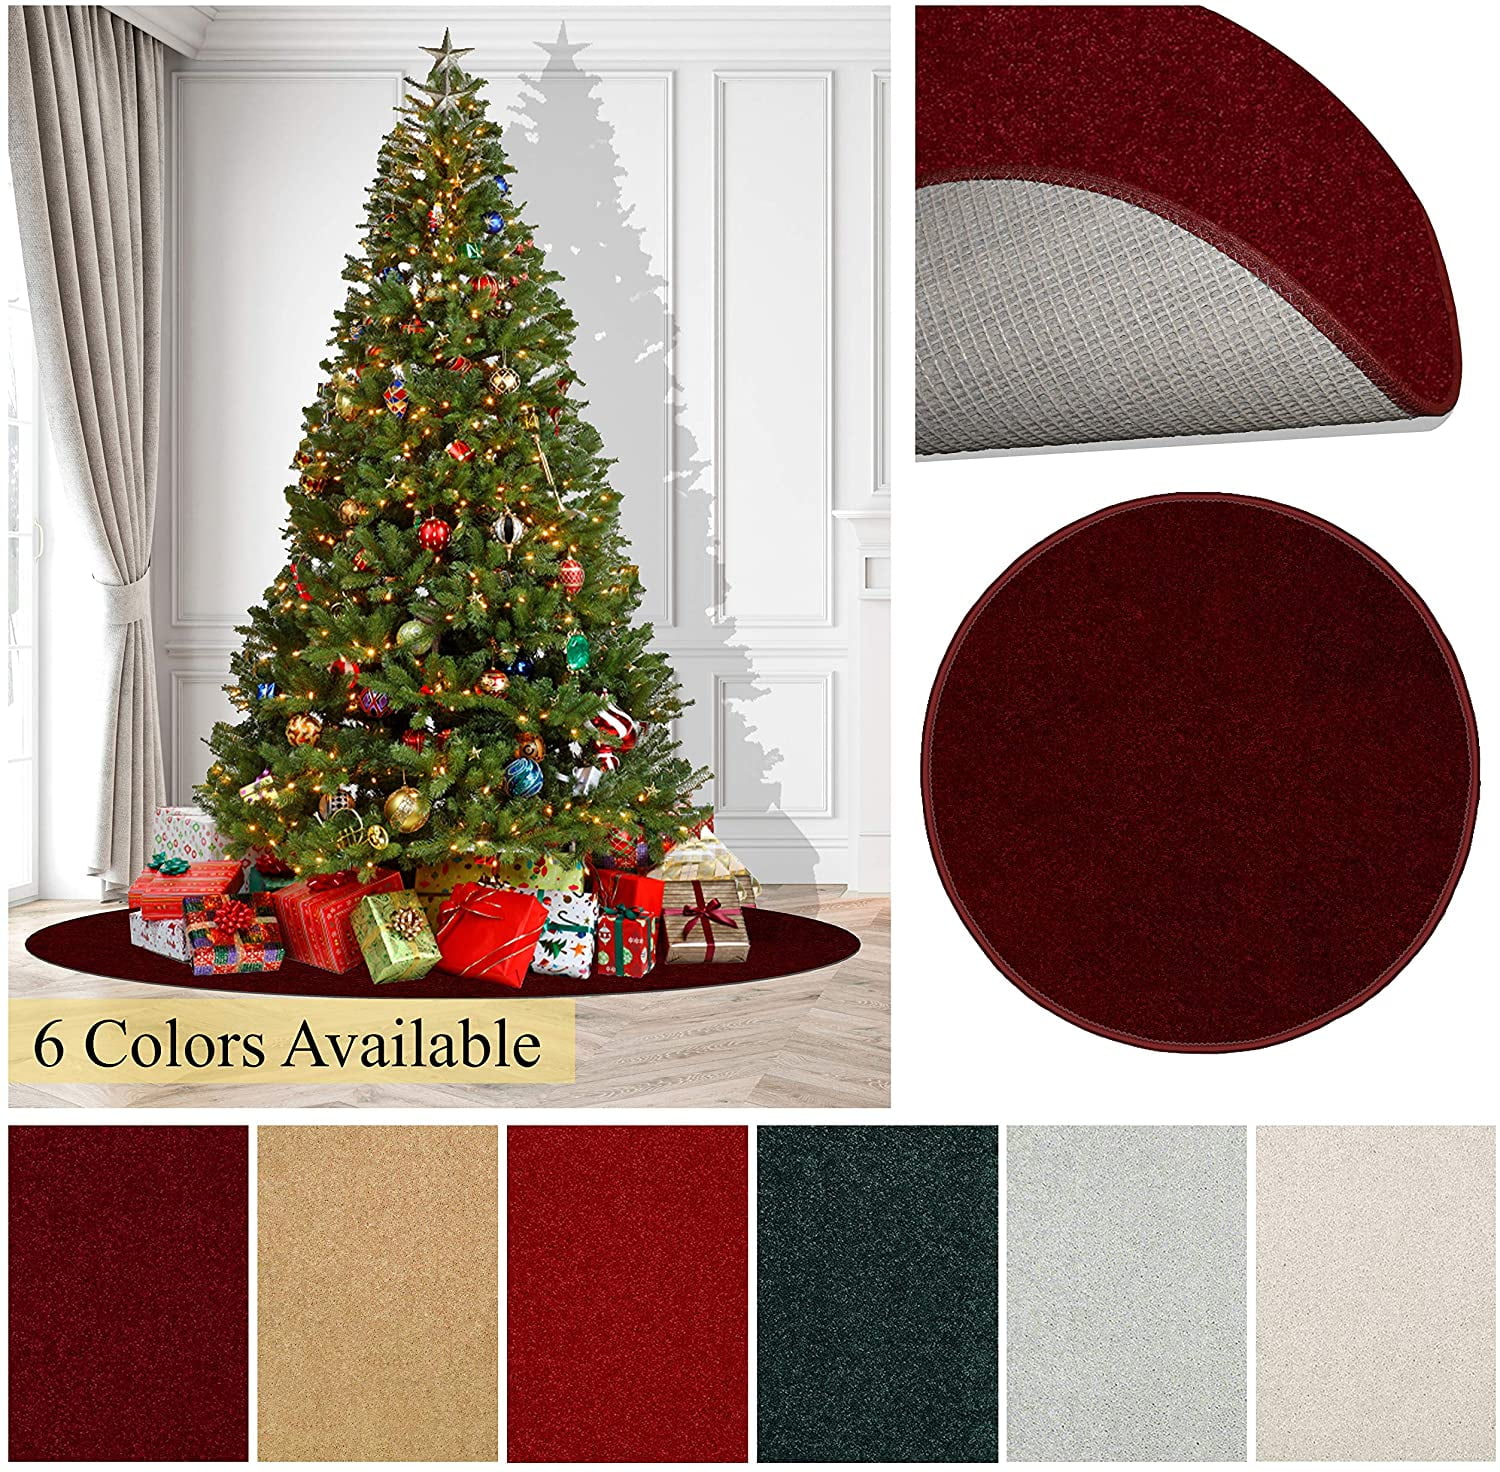 Super Soft Area Rugs Christmas Knot Red Ribbon Pine Tree Branch Plush Round Mat Pad for Bedroom Living Room Dorm Durable Indoor Cozy Carpets Play Rug 3' Diameter 